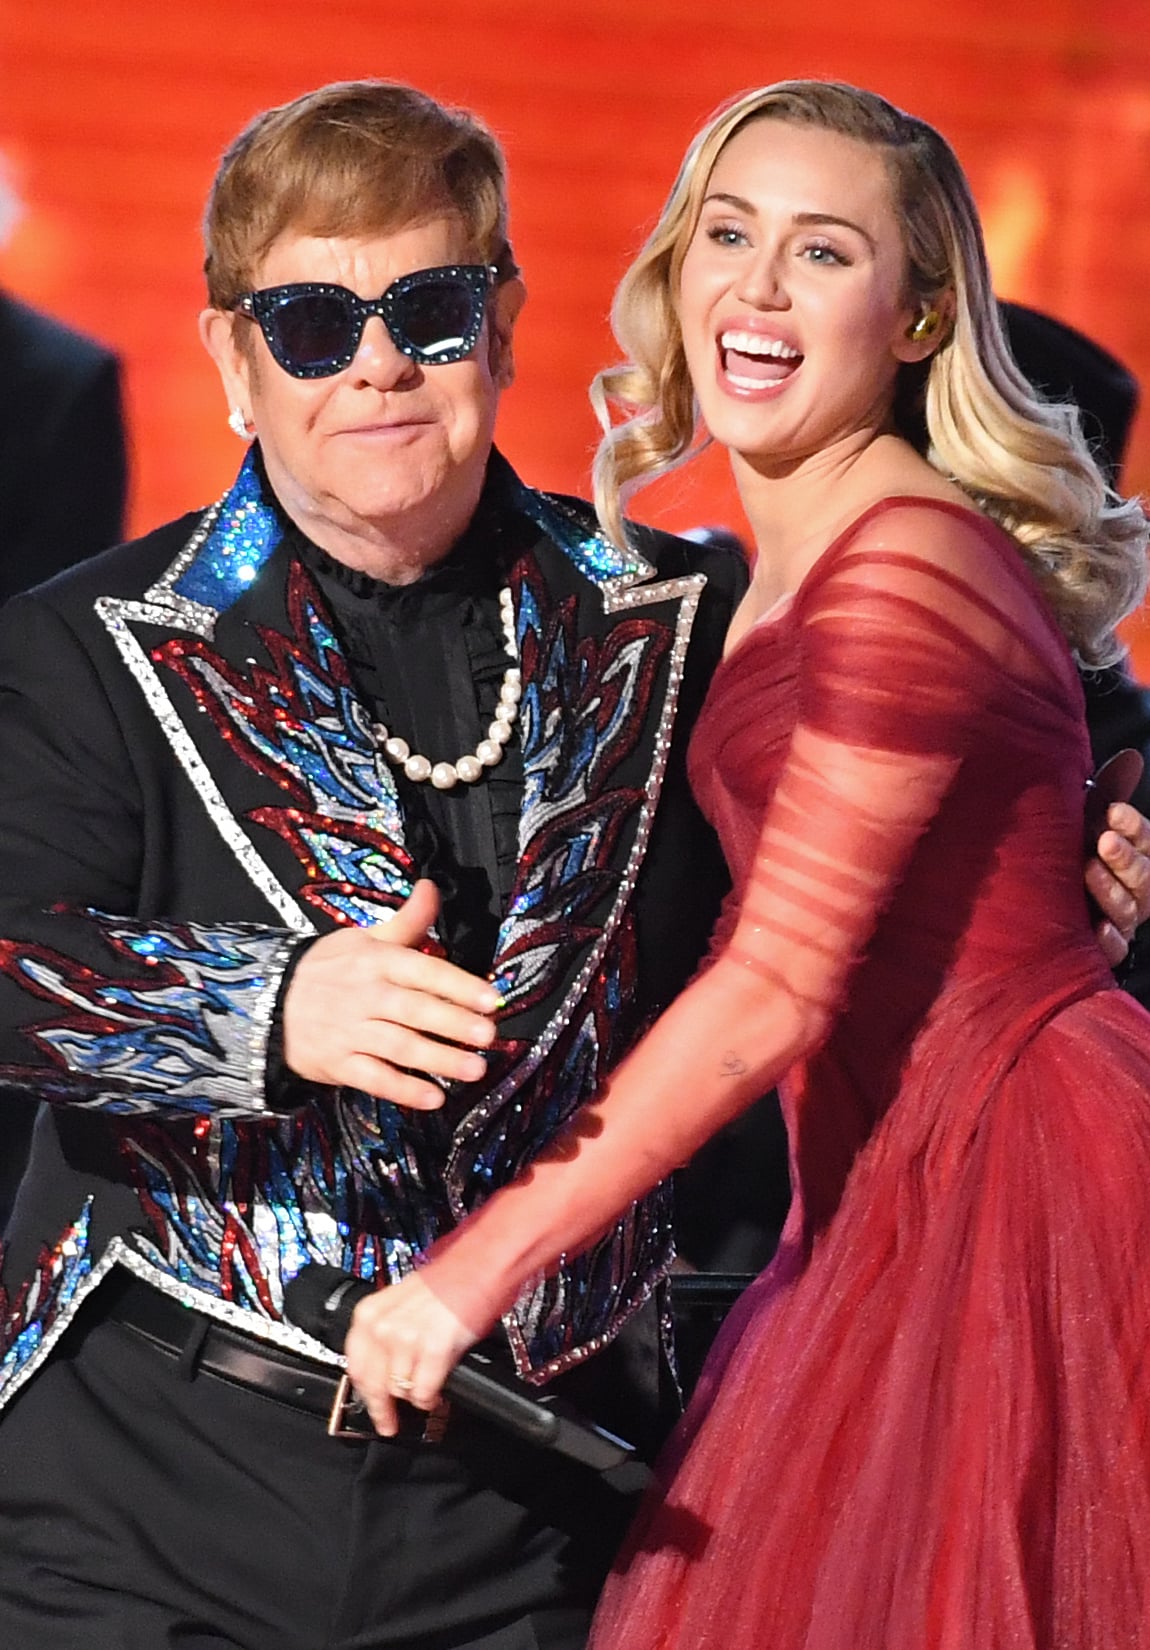 Elton John and Miley Cyrus performed "Tiny Dancer" at the show in 2018.